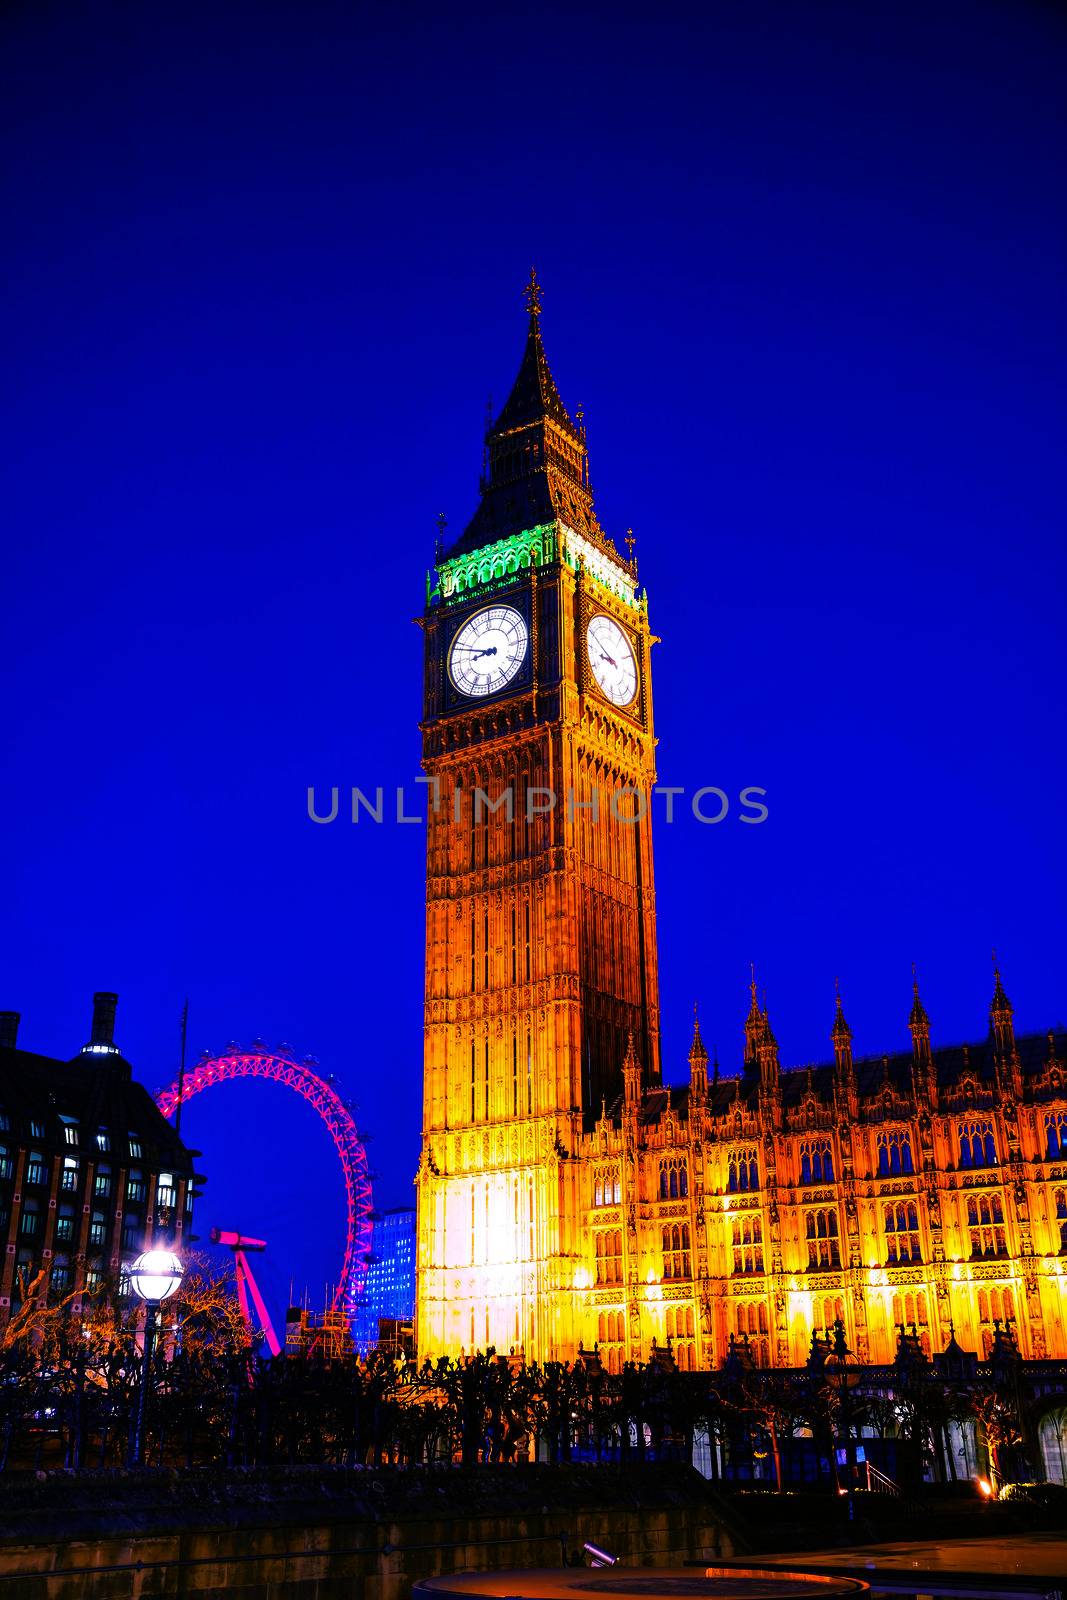 Clock tower in London at the night time